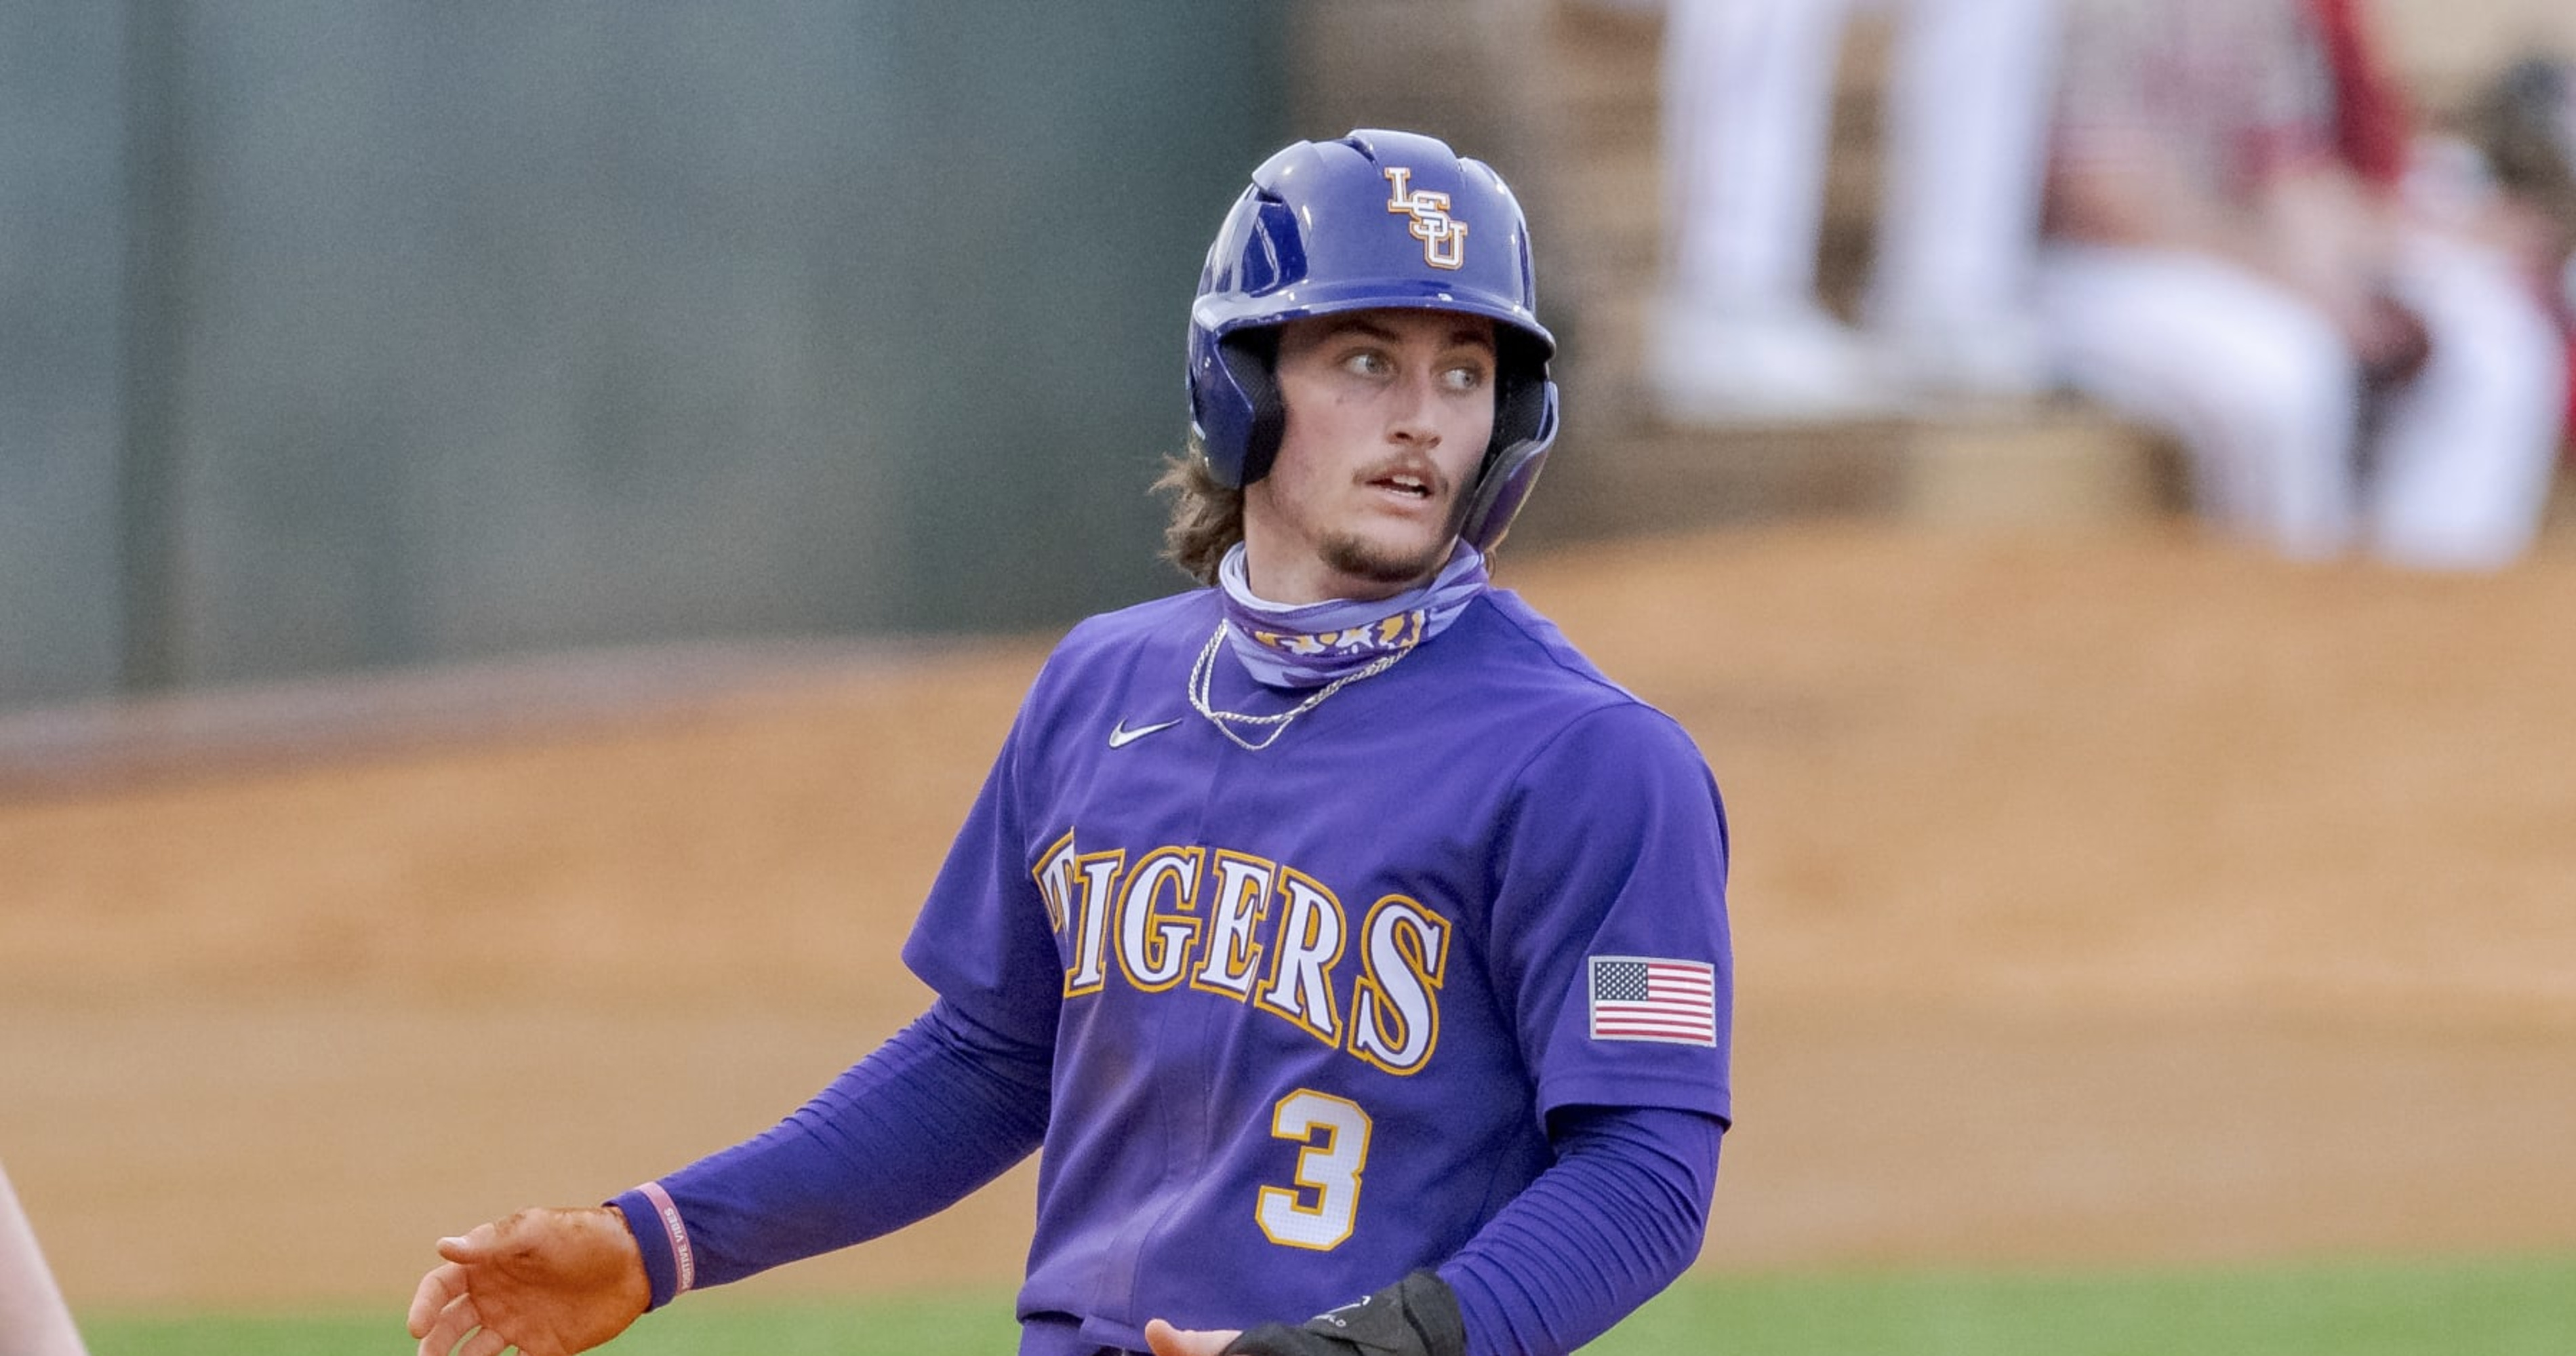 College baseball's top 150 MLB draft prospects, ranked by